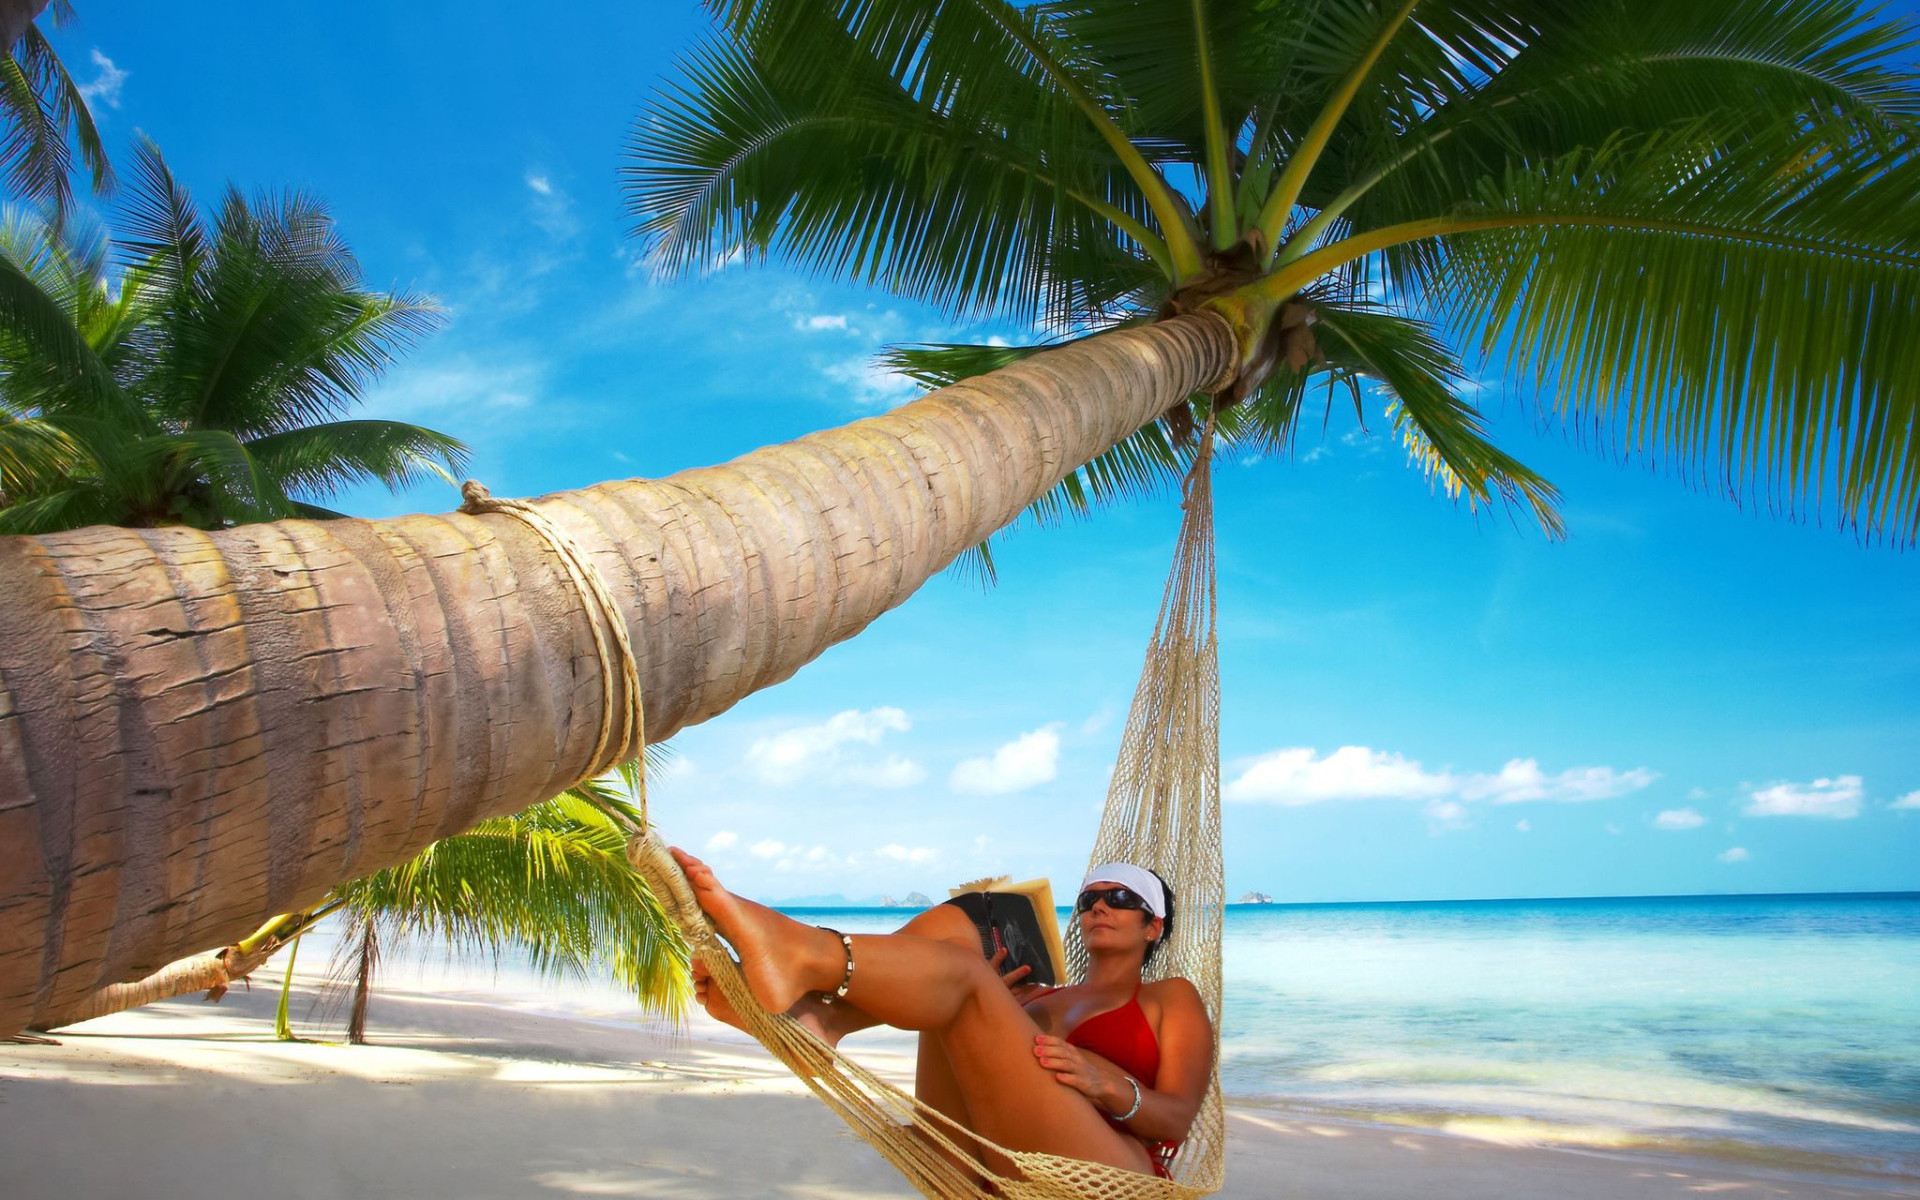 Relax in a hammock on the island of Koh Samui, Thailand